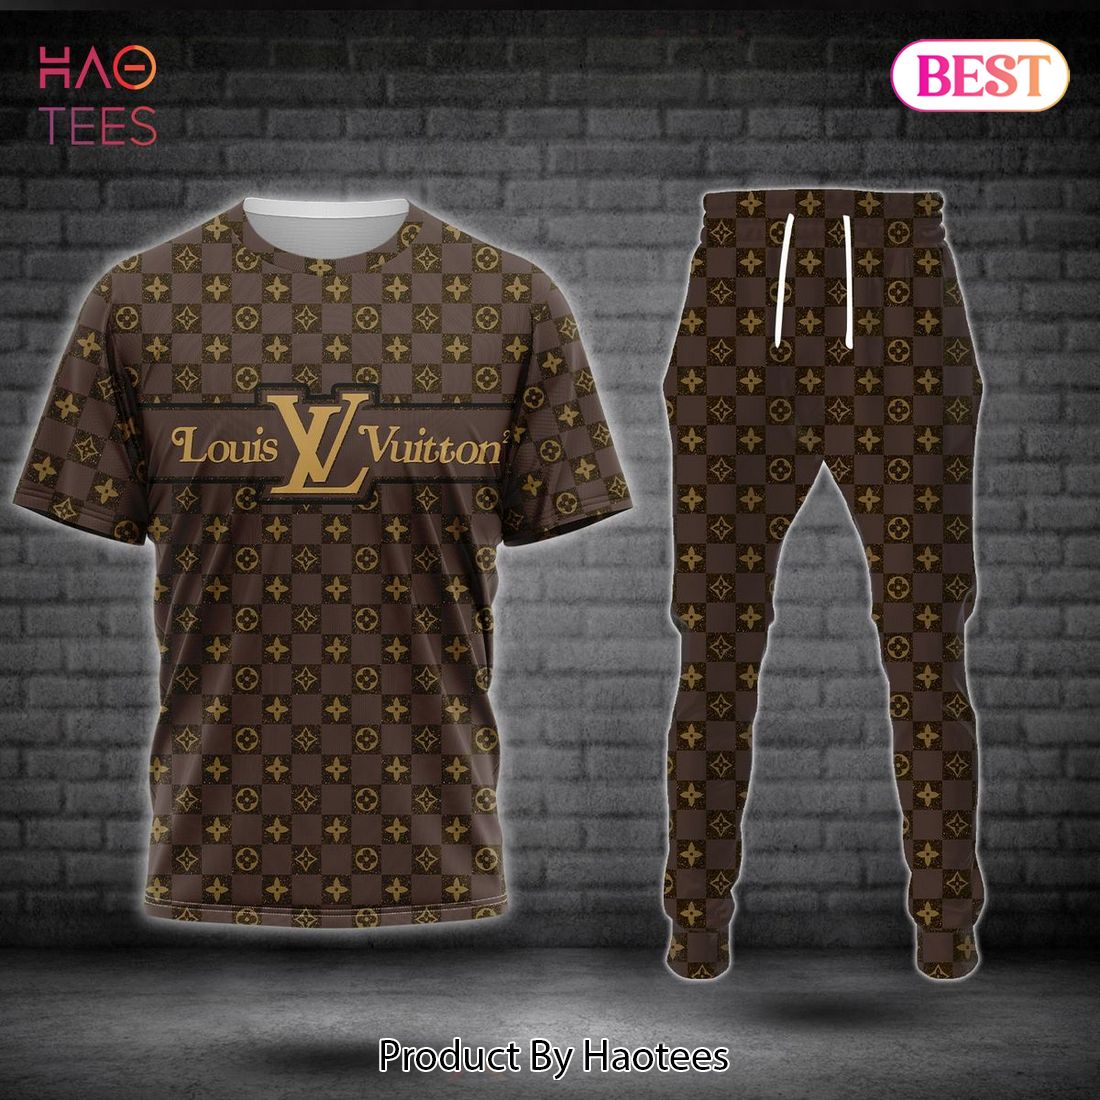 HOT Louis Vuitton Dark Brown Luxury Brand T-Shirt And Pants Limited Edition